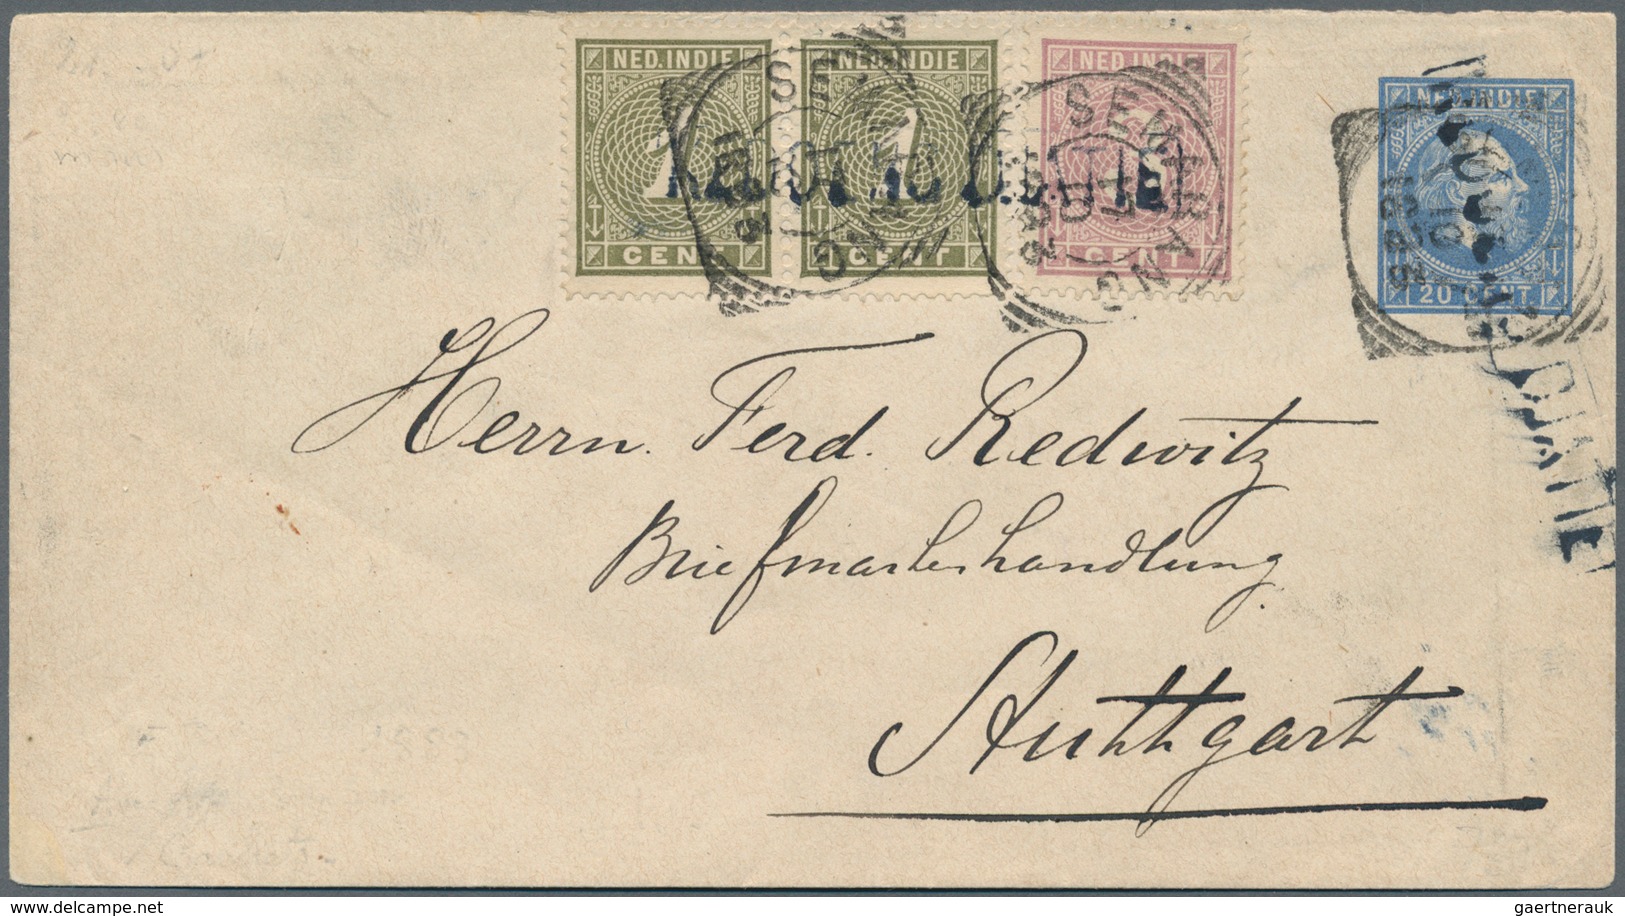 Niederländisch-Indien: 1875/1910, used stationery lot of envelopes (14) and cards (3) all Willem (ex